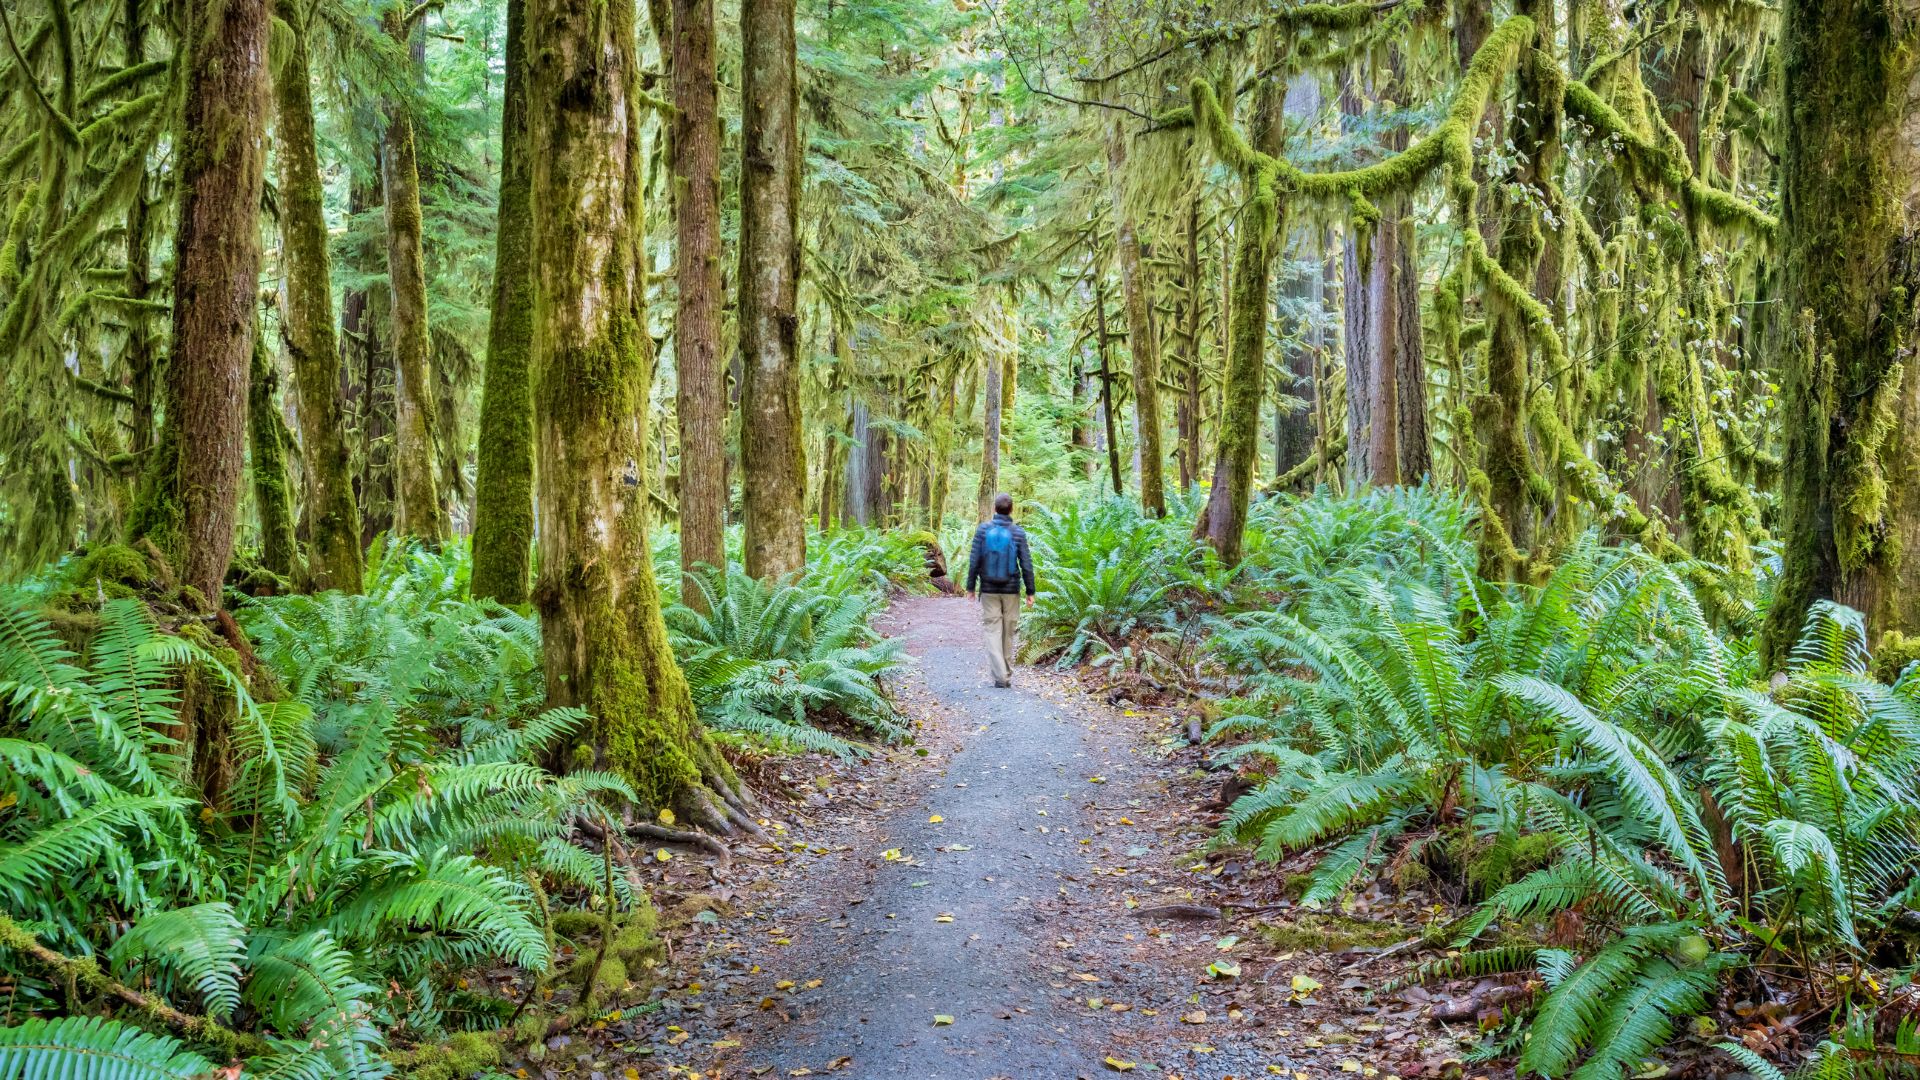 A person takes a hike through the rainforest of the Pacific Northwest